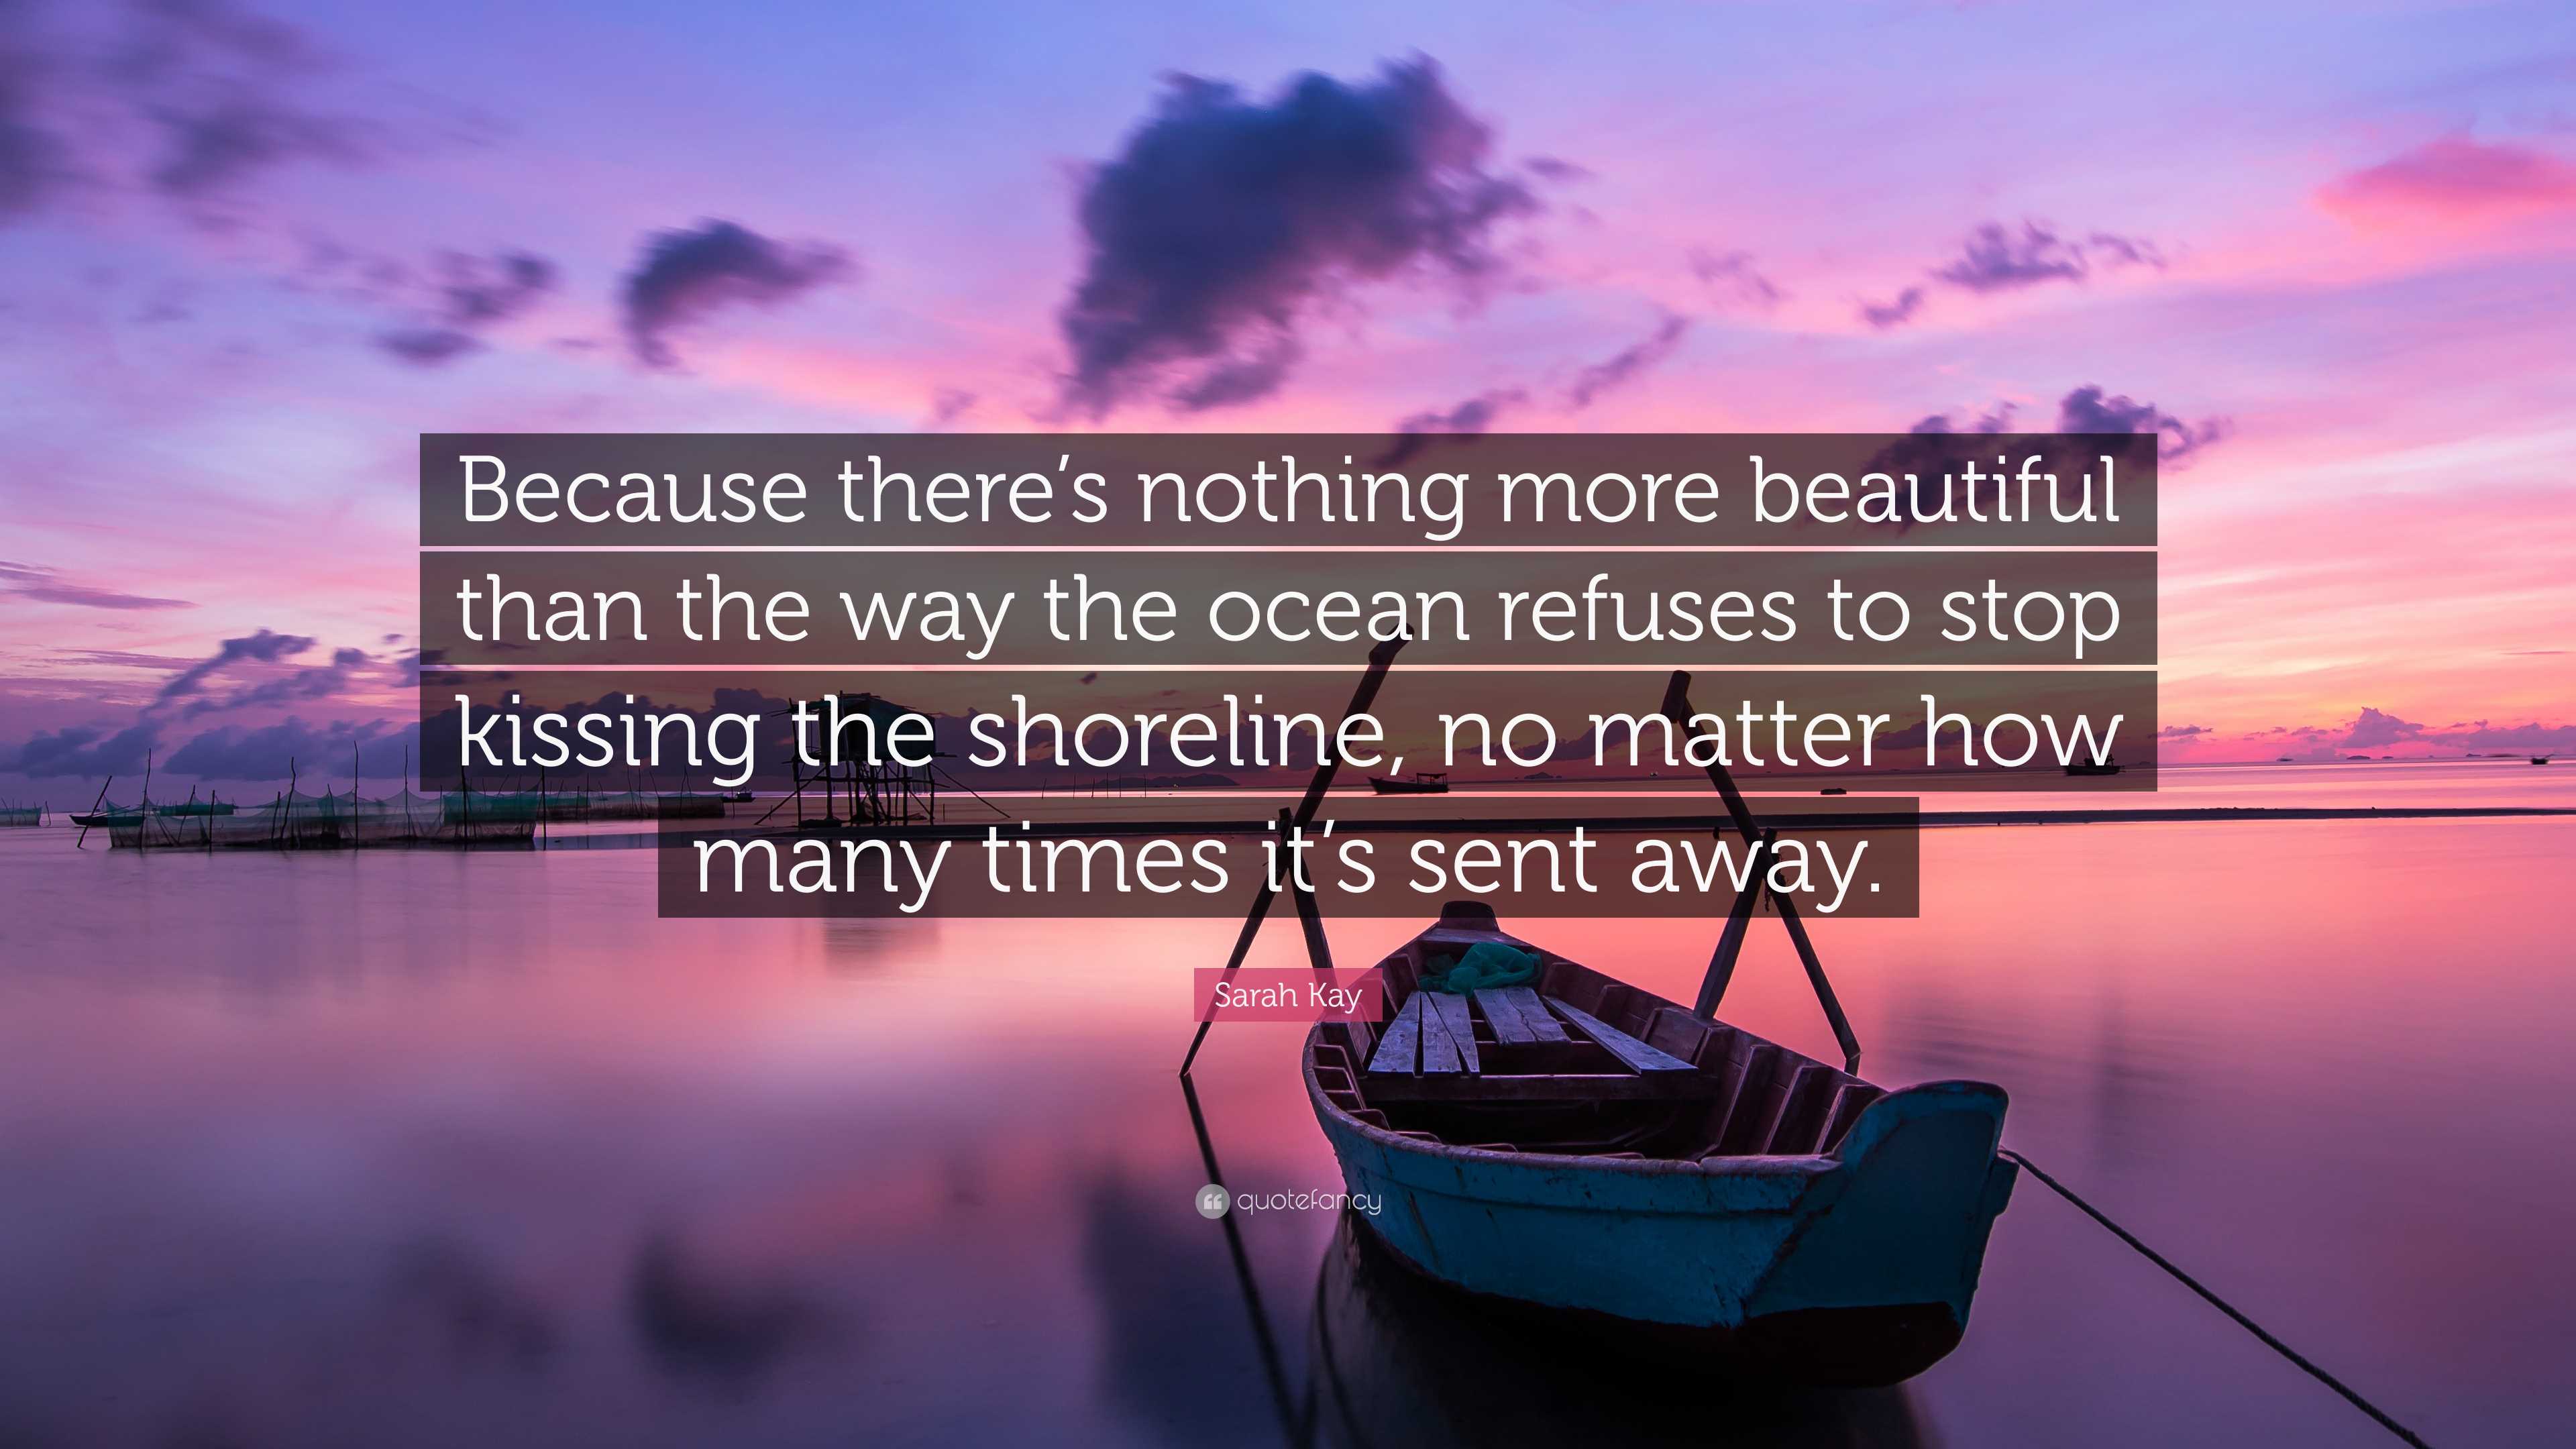 Sarah Kay Quote: “Because there’s nothing more beautiful than the way ...